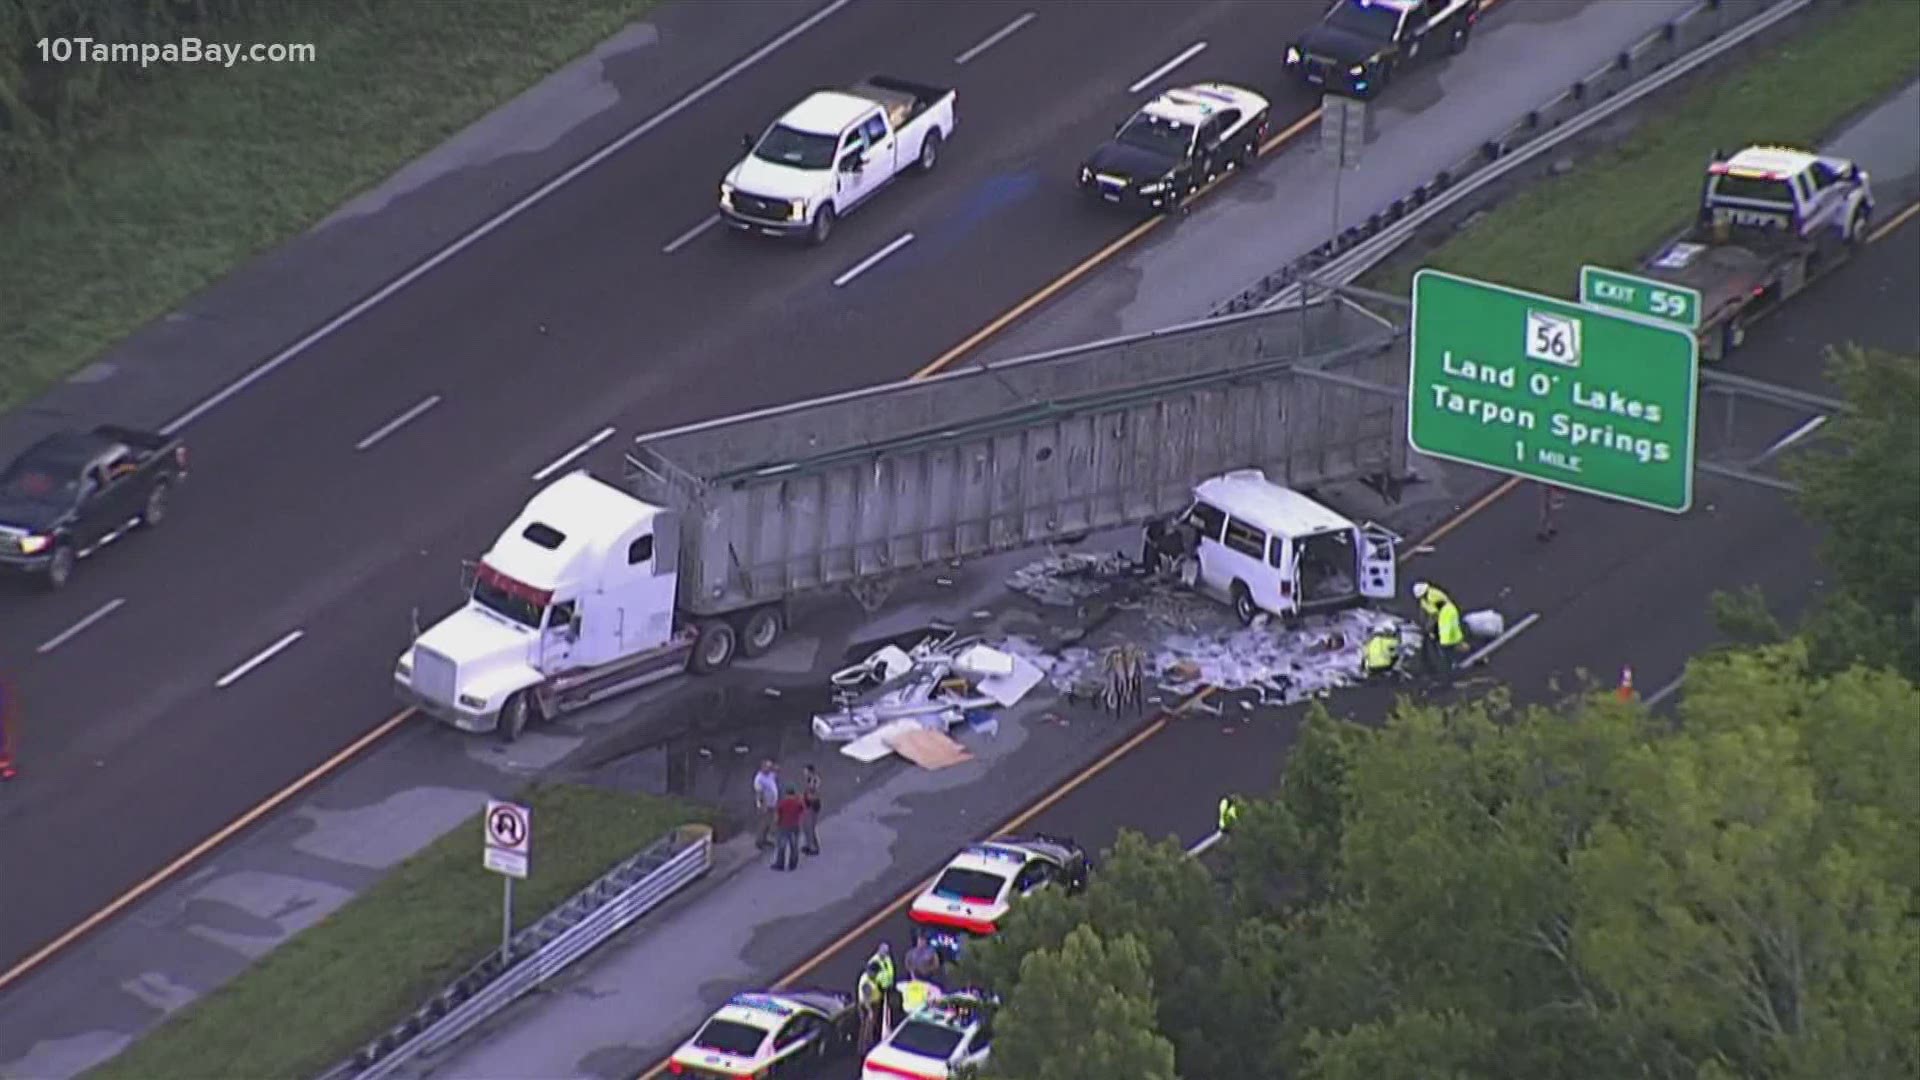 The northbound lanes on I-275 just before the Land O' Lakes and Tarpon Springs exit were blocked Monday morning after a crash between a van and semi-truck.